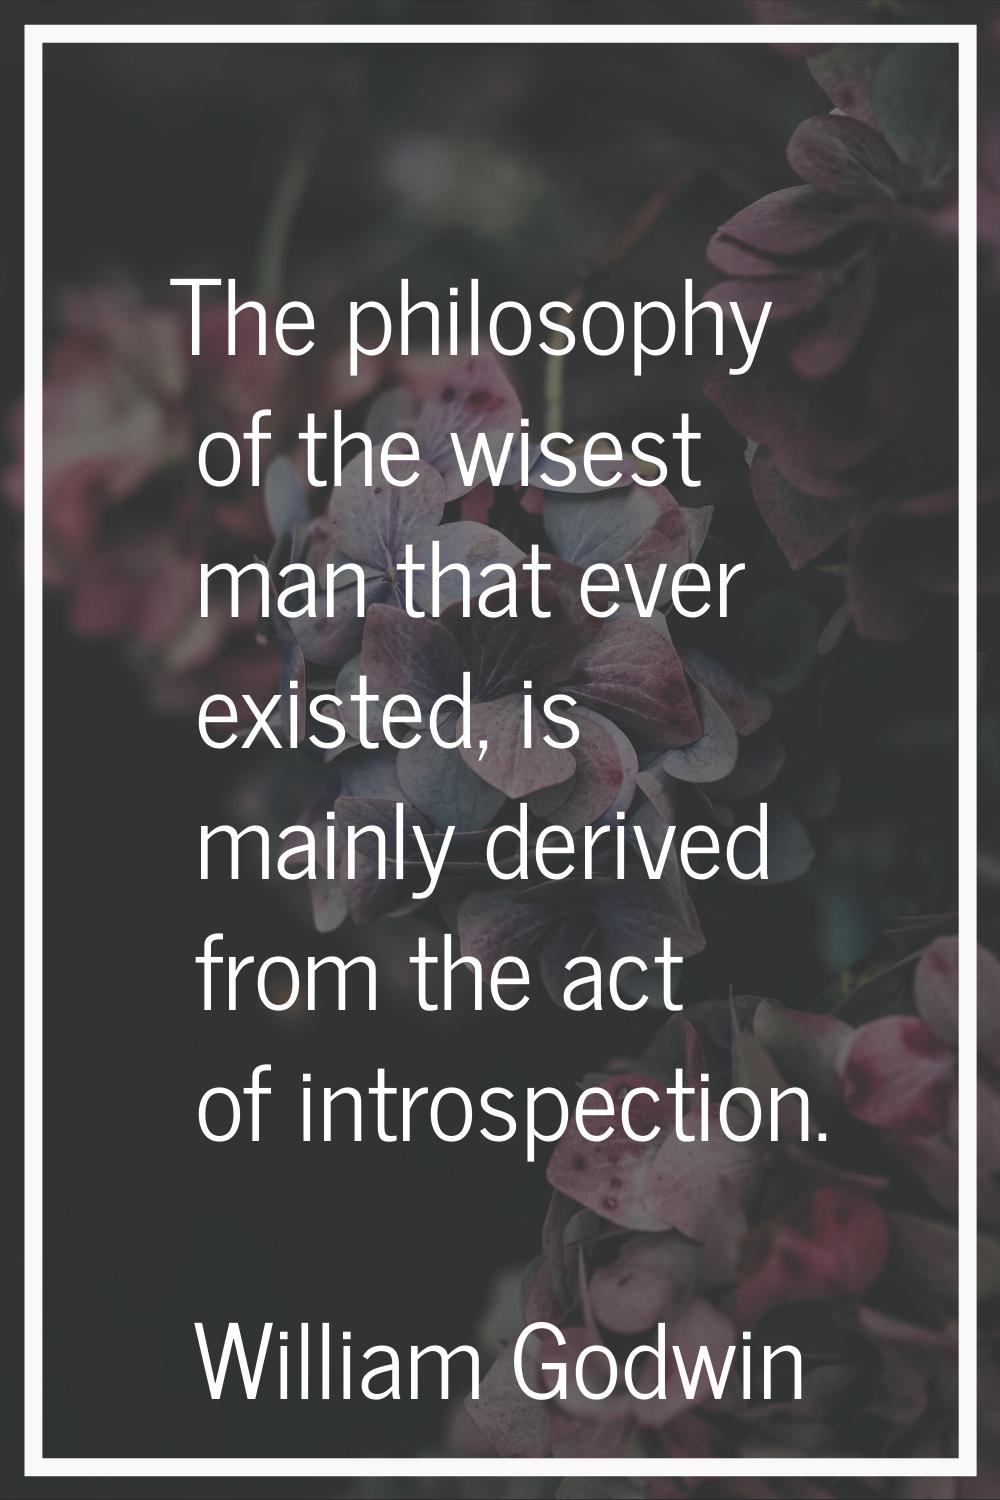 The philosophy of the wisest man that ever existed, is mainly derived from the act of introspection